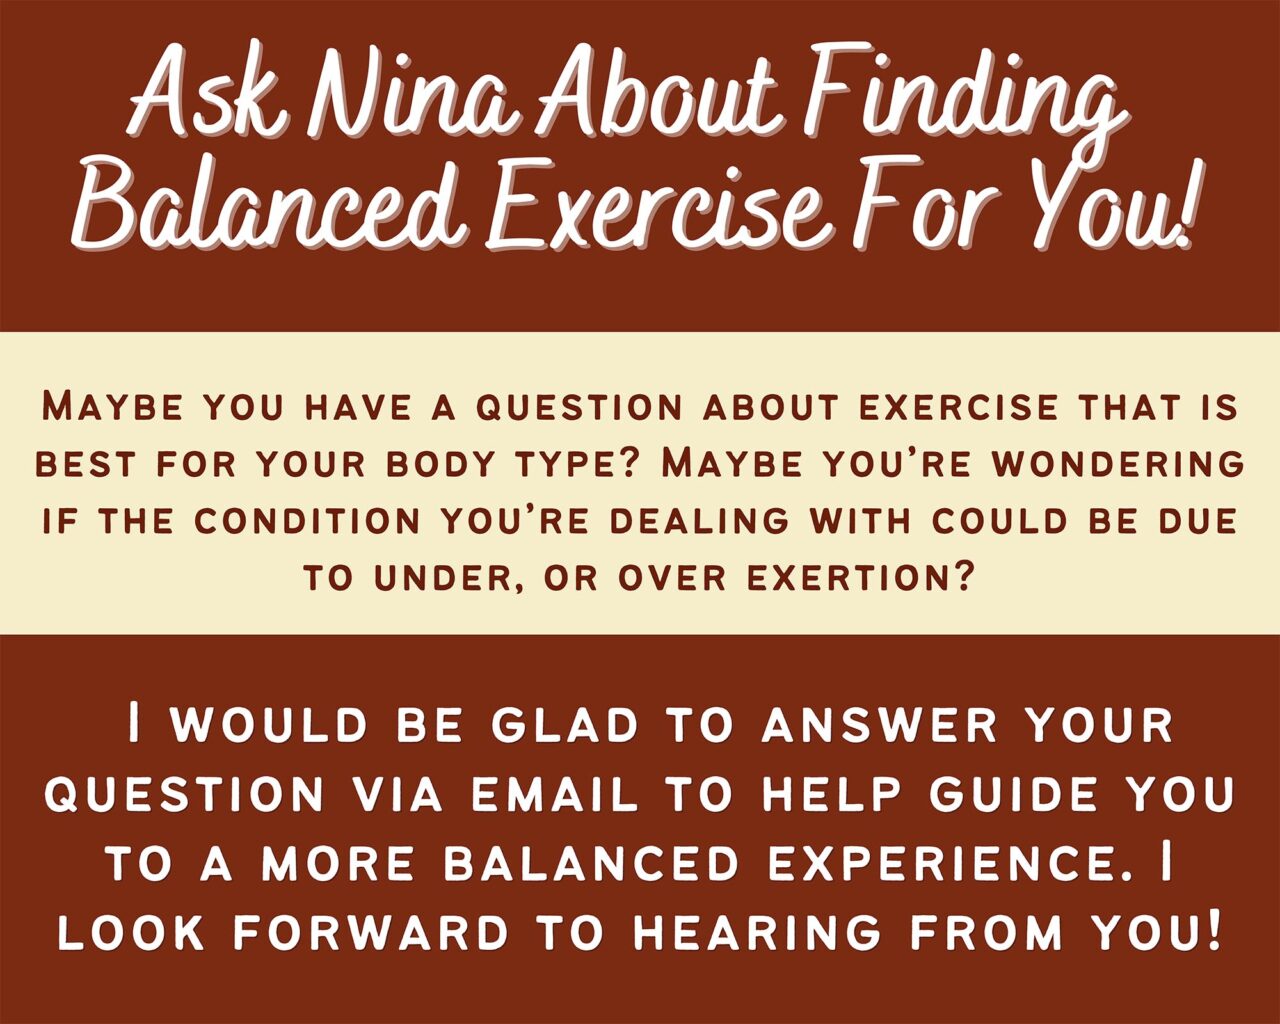 Ask Nina About Finding Balanced Exercise For You